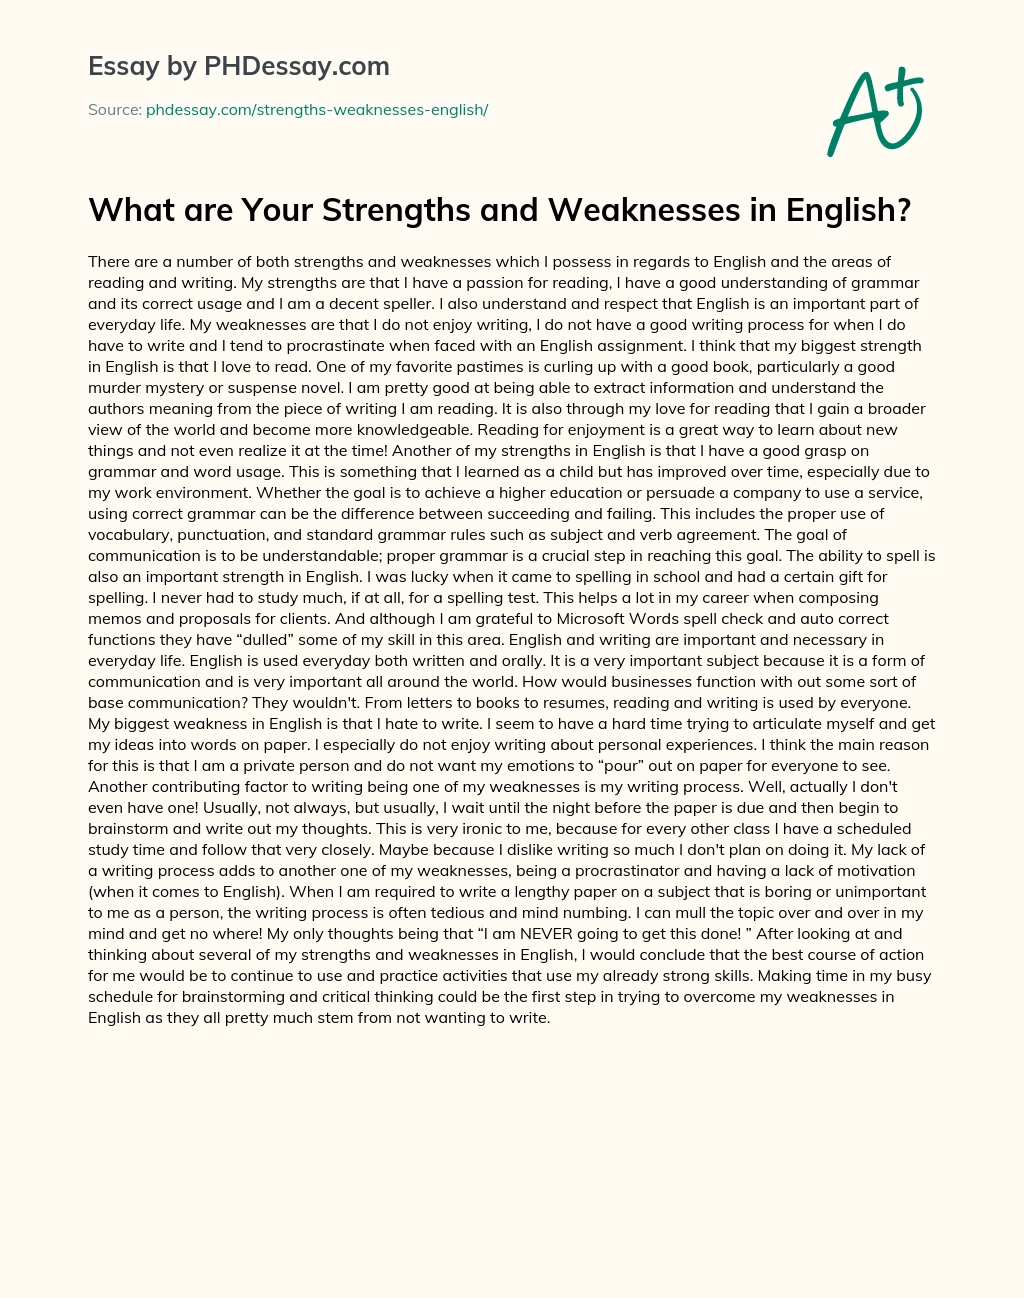 What are Your Strengths and Weaknesses in English? essay